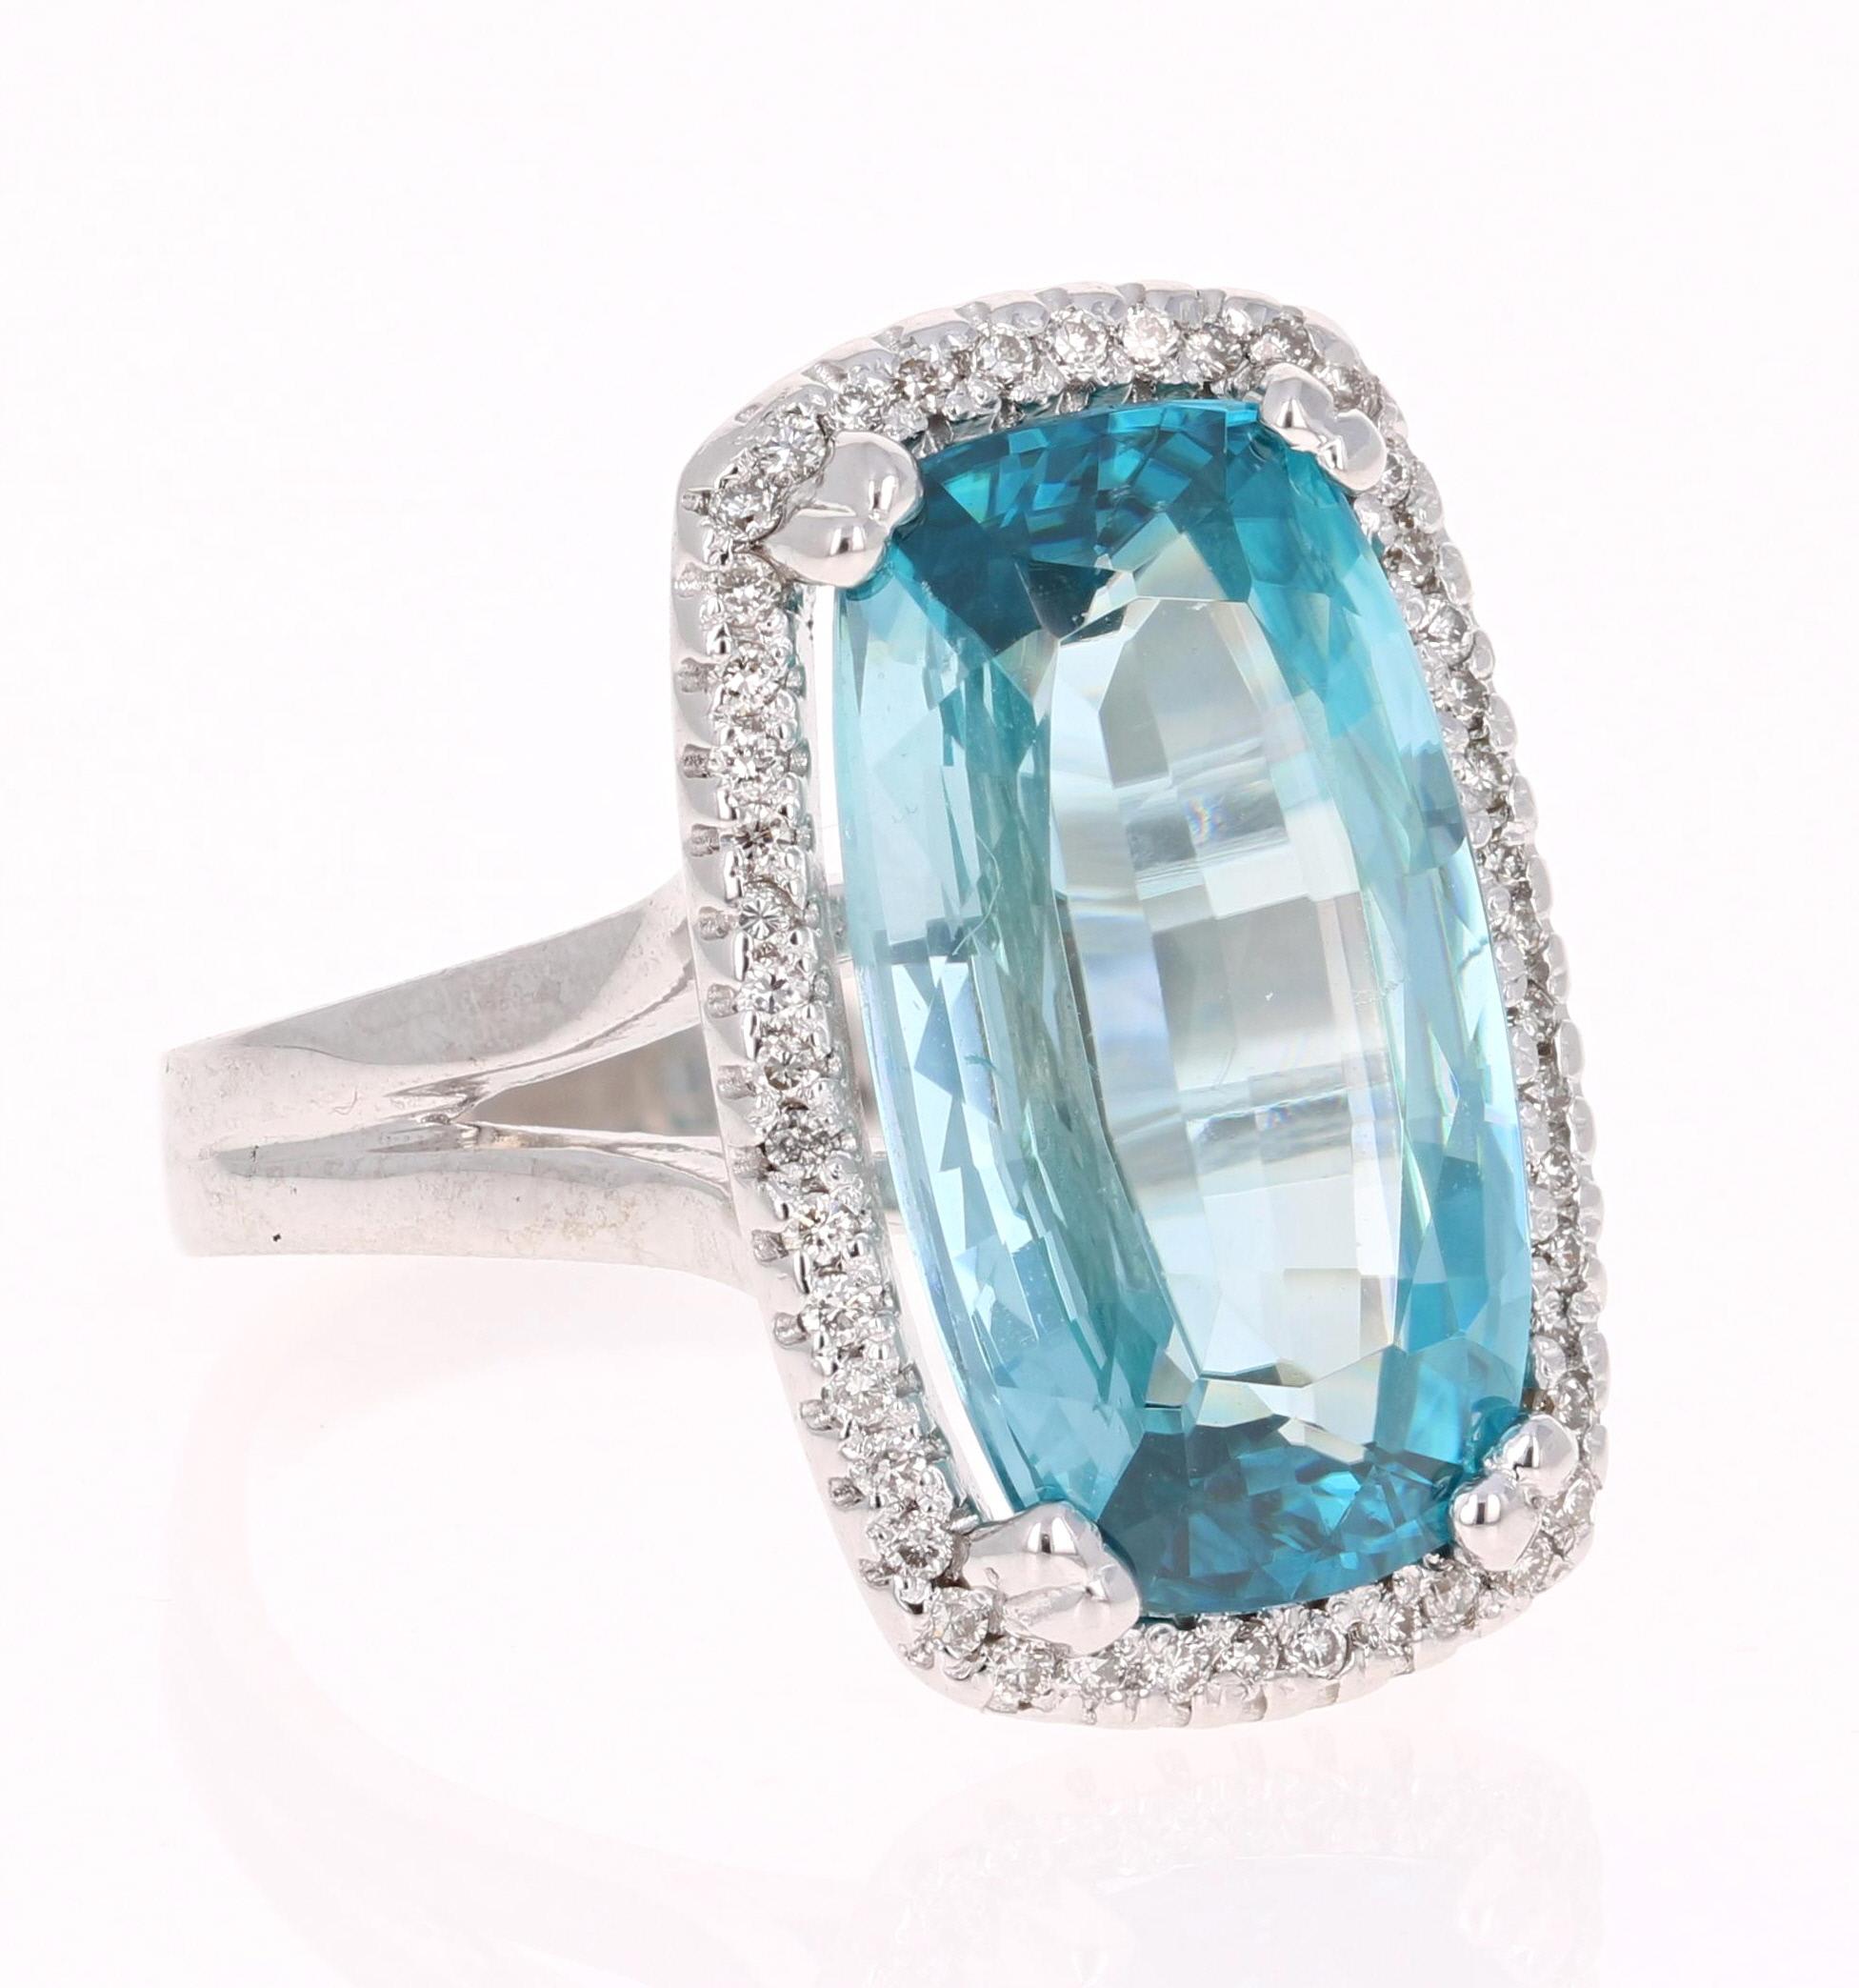 A beautiful Blue Zircon and Diamond ring that can be a nice Engagement ring or just an everyday ring!
Blue Zircon is a natural stone mined mainly in Sri Lanka, Myanmar, and Australia.  
This ring has a Oval-Rectangular Cut Blue Zircon that weighs